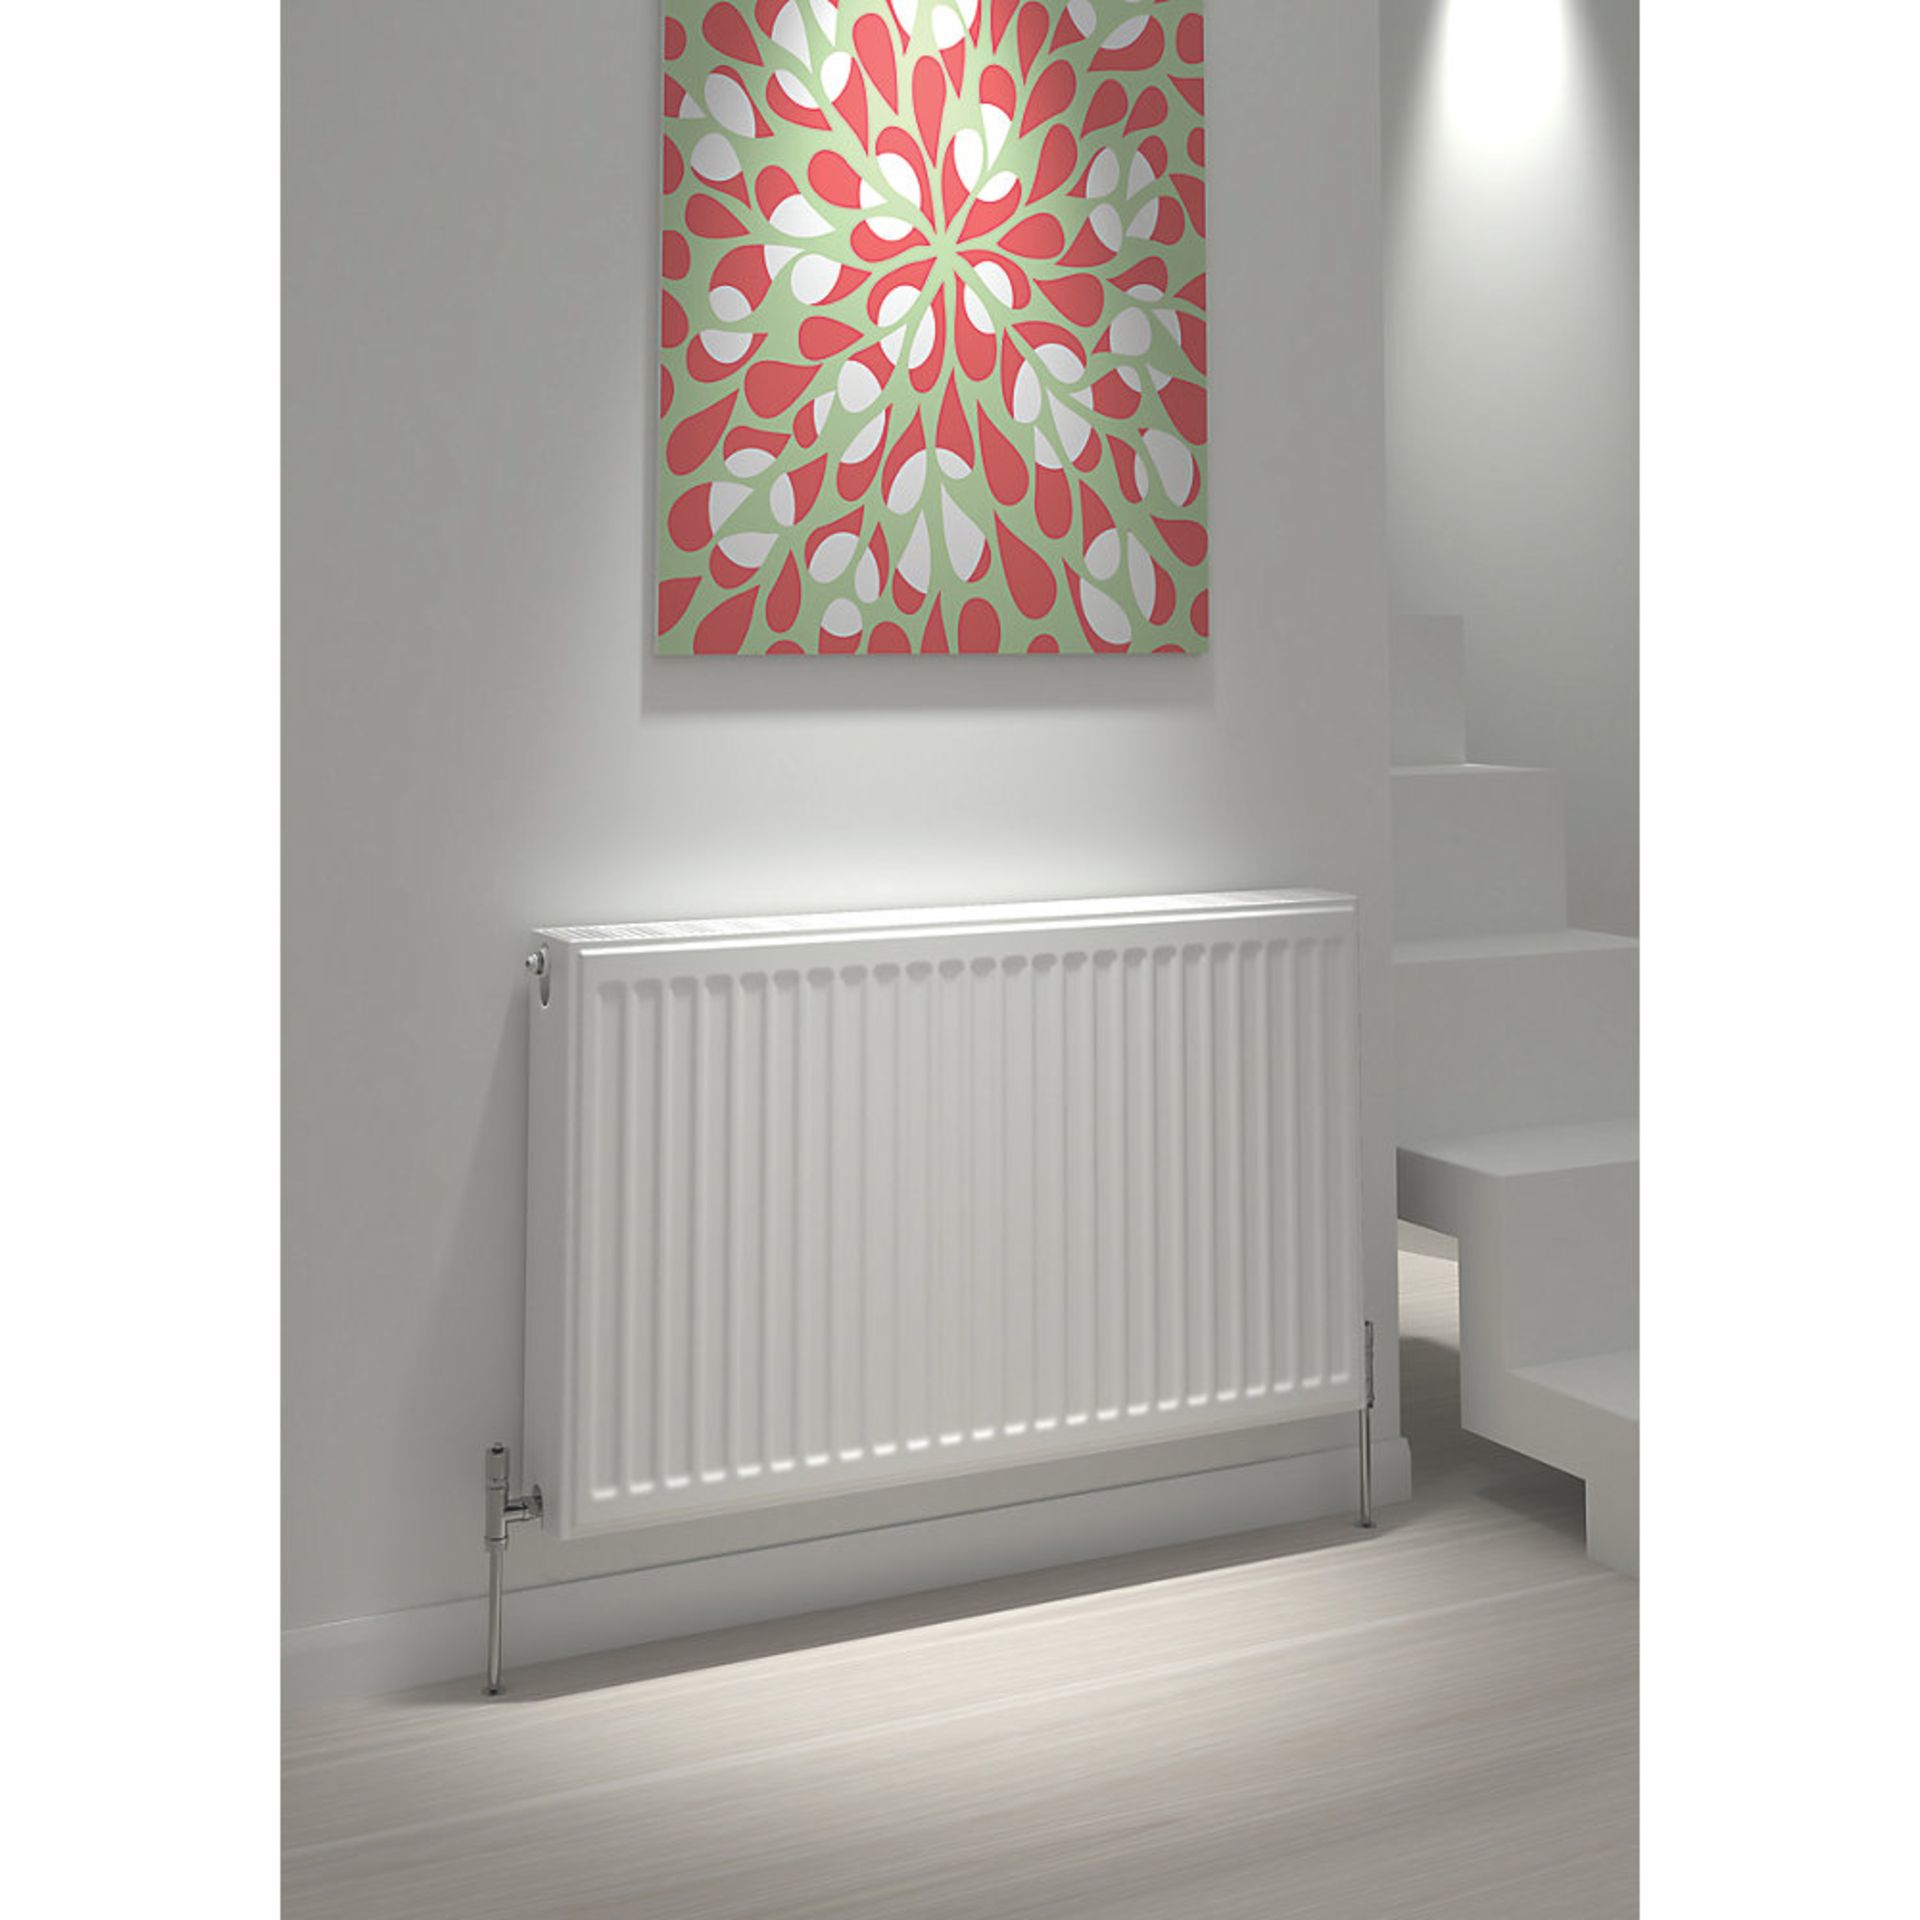 (RK1003) 700 X 1200MM TYPE 21 DOUBLE-PANEL PLUS SINGLE CONVECTOR RADIATOR WHITE. High perform... - Image 2 of 2